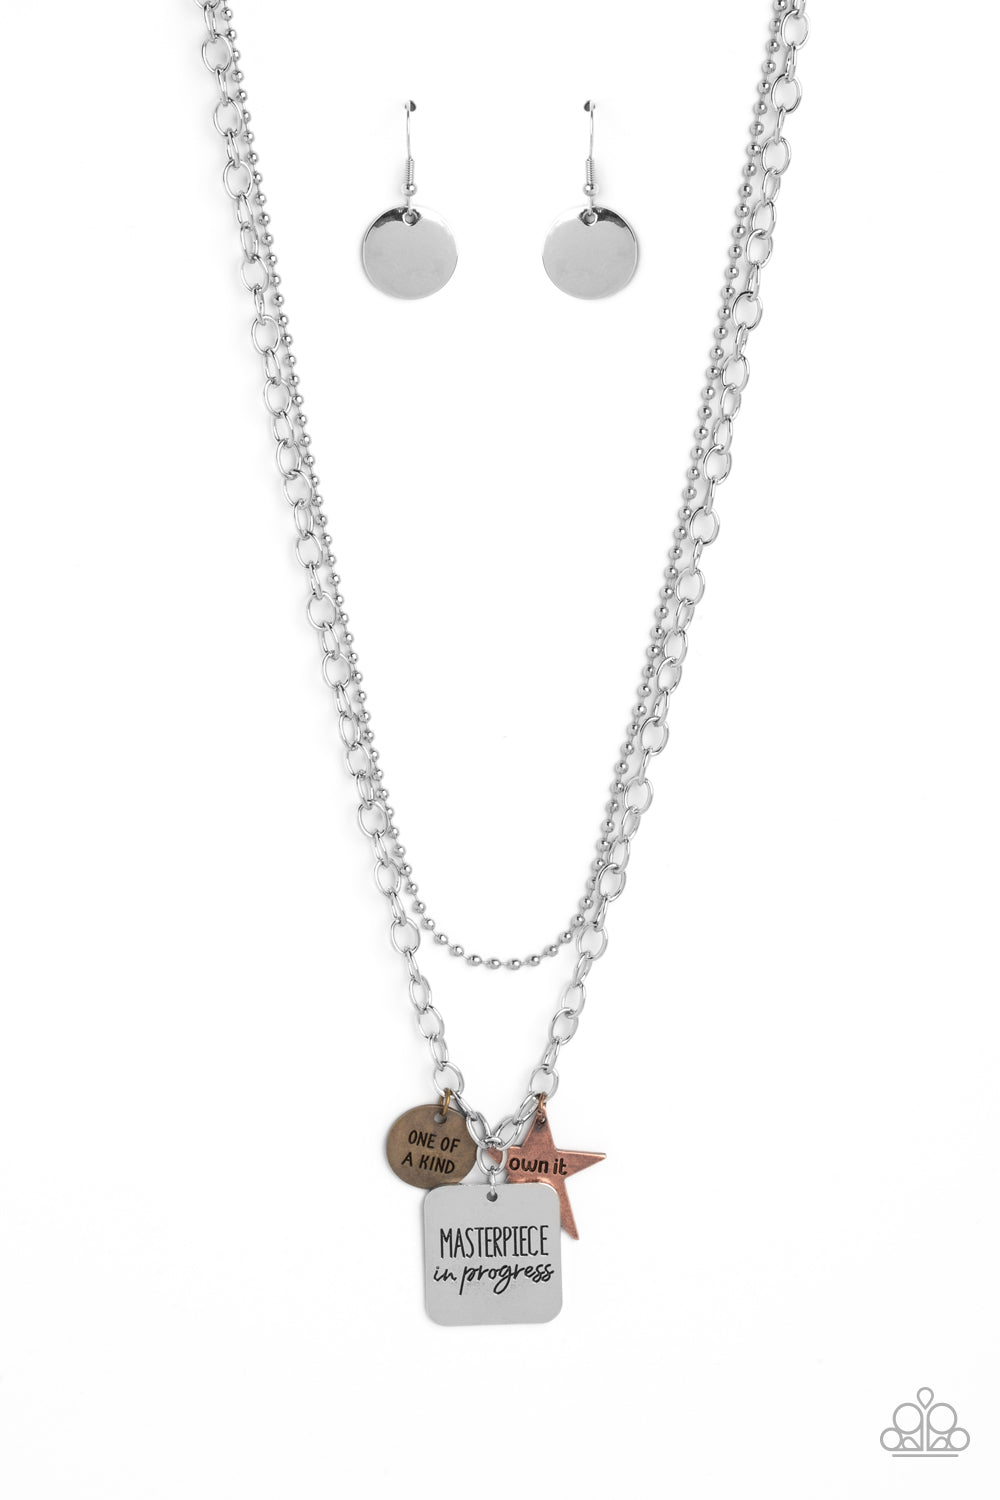 Masterpiece in Progress Multi Necklace - Paparazzi Accessories  Featuring three inspirational pendants, a copper star, brass circle, and silver square fall along a silver chain. The star features the phrase "own it," the circle features the phrase "one of a kind," and the square pendant features the phrase "masterpiece in progress." Hanging just above the inspiring collection, a silver ball chain creates an additional layer to the design. Includes one pair of matching earrings.